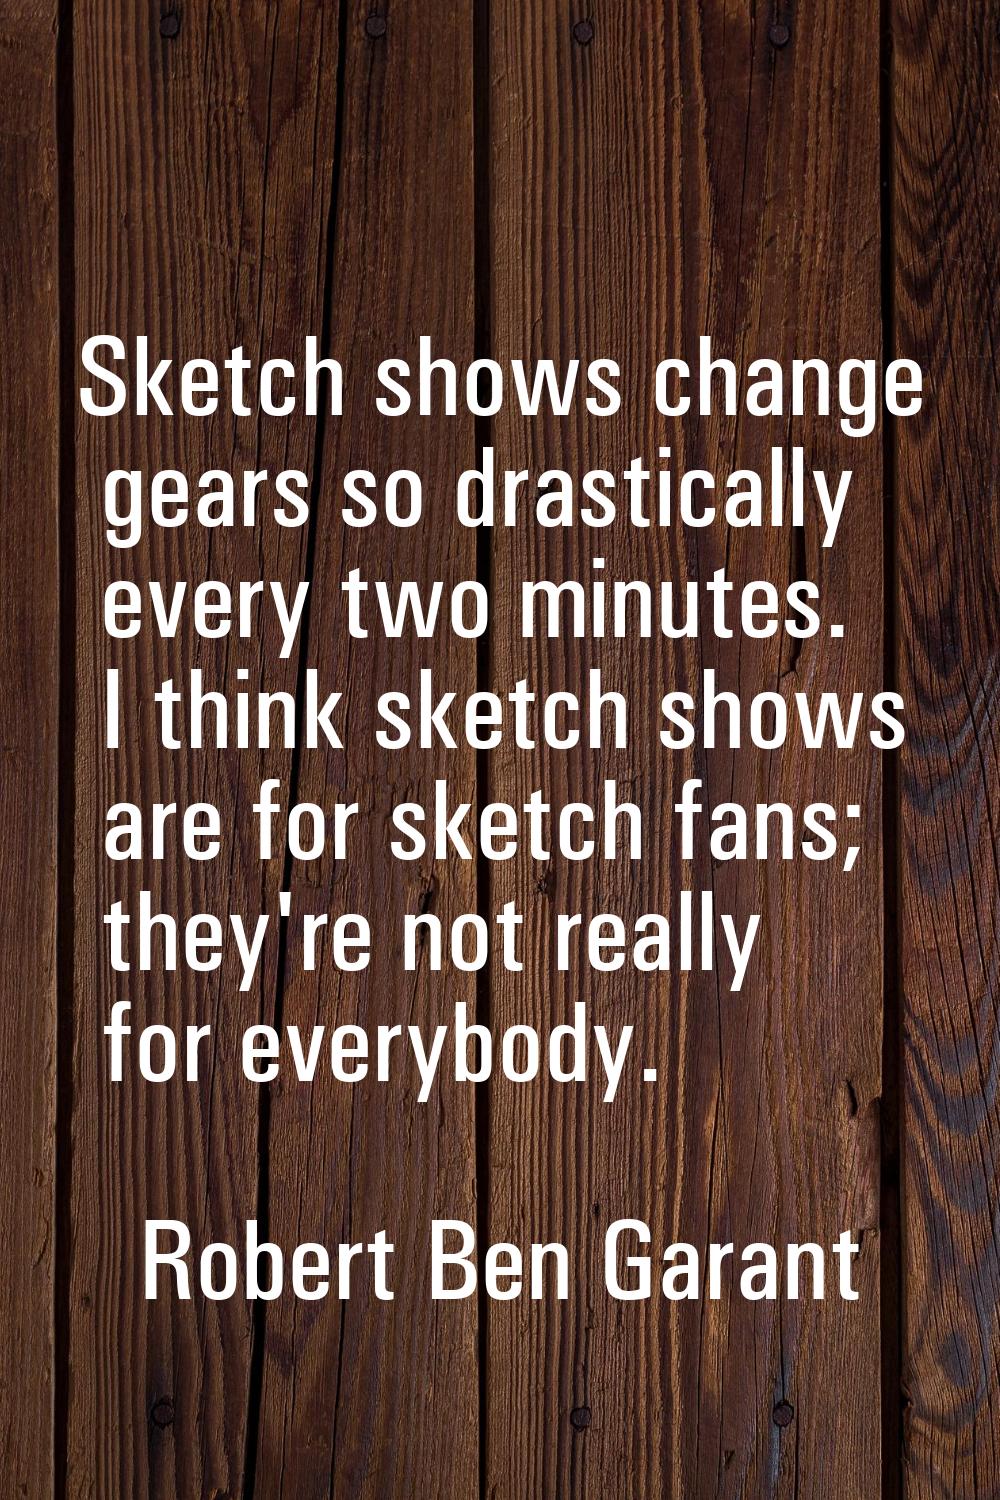 Sketch shows change gears so drastically every two minutes. I think sketch shows are for sketch fan